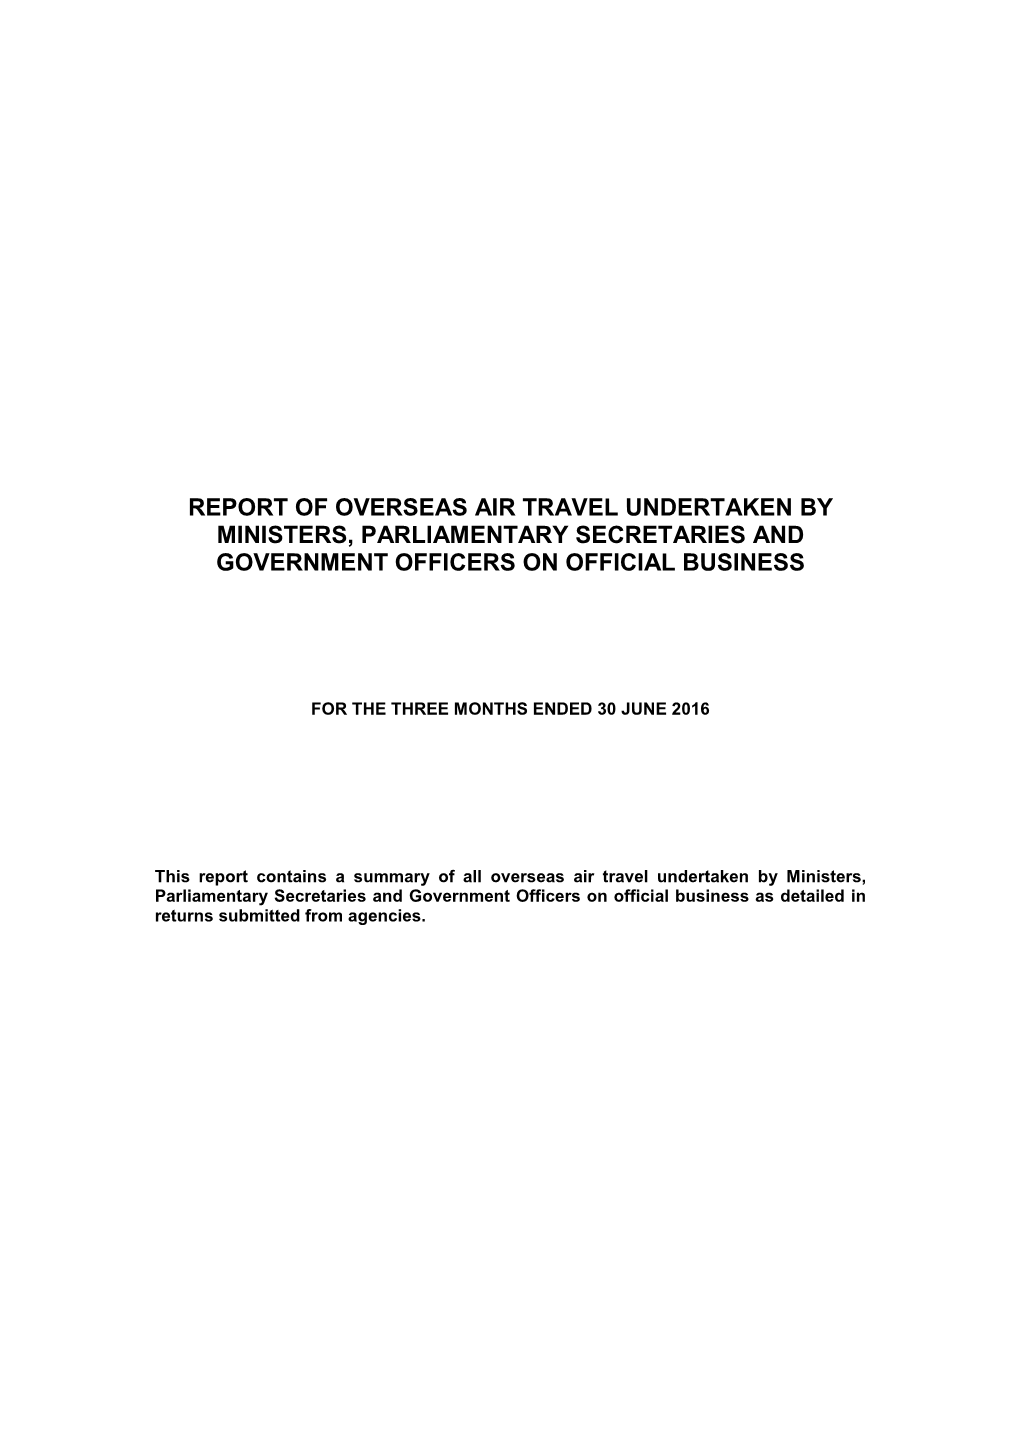 Report of Overseas Air Travel Undertaken by Ministers, Parliamentary Secretaries and Government Officers on Official Business